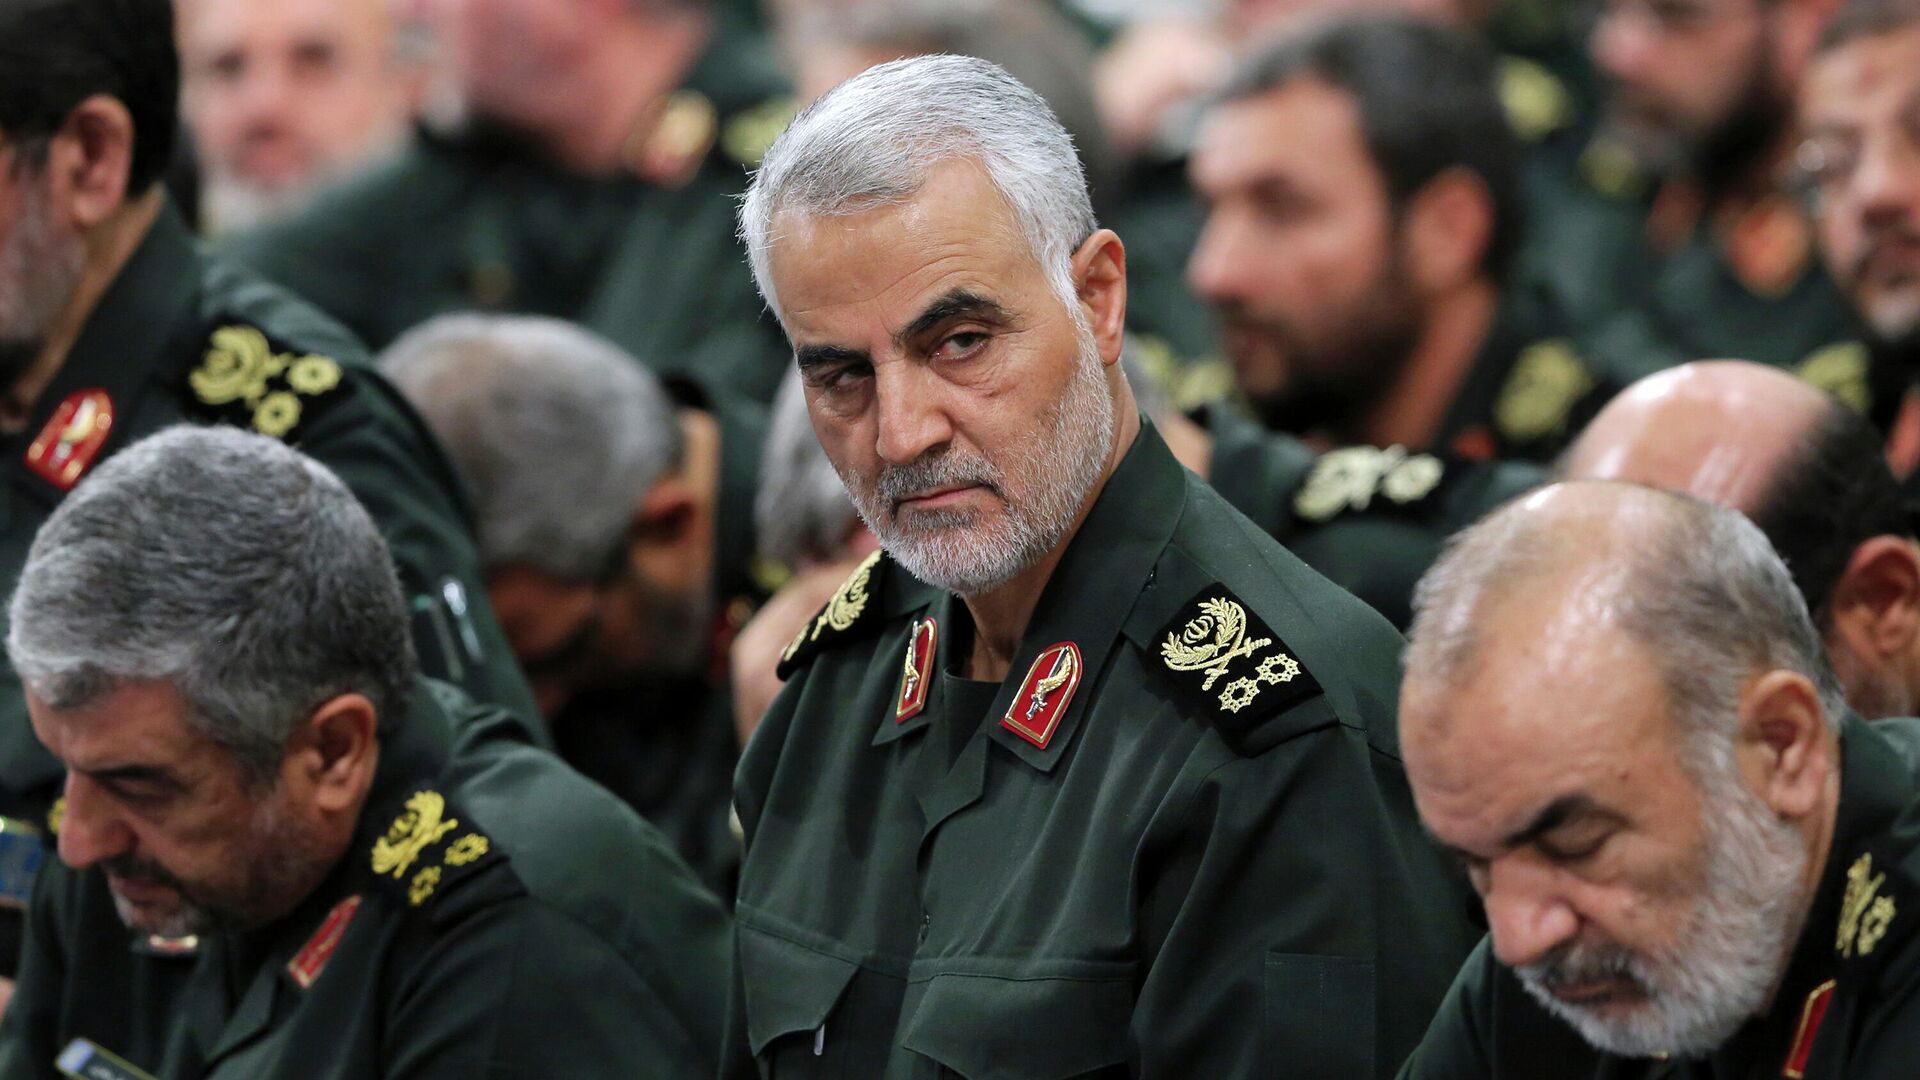 In this Sept. 18, 2016, file photo provided by an official website of the office of the Iranian supreme leader, Revolutionary Guard Gen. Qassem Soleimani, center, attends a meeting in Tehran, Iran. Iran executed Mahmoud Mousavi Majd convicted of providing information to the United States and Israel about the prominent Revolutionary Guard general later killed by a U.S. drone strike, state TV reported on Monday, July 20, 2020. (Office of the Iranian Supreme Leader via AP, File) - Sputnik International, 1920, 03.01.2022